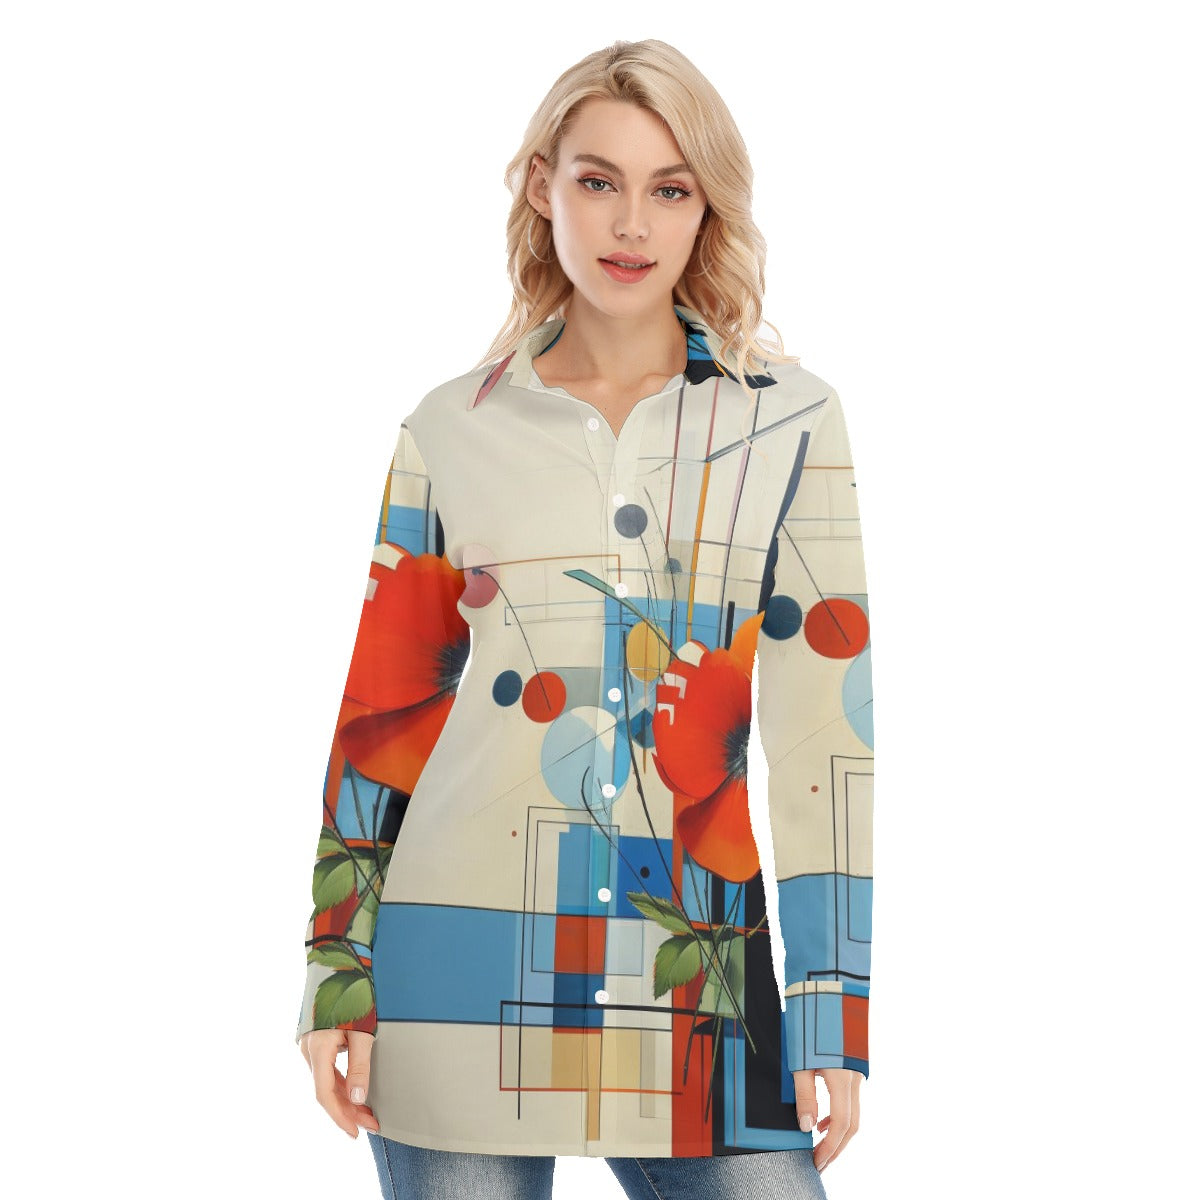 3R9GC All-Over Print Women's Long Shirt |115GSM 98% Cotton and 2% spandex